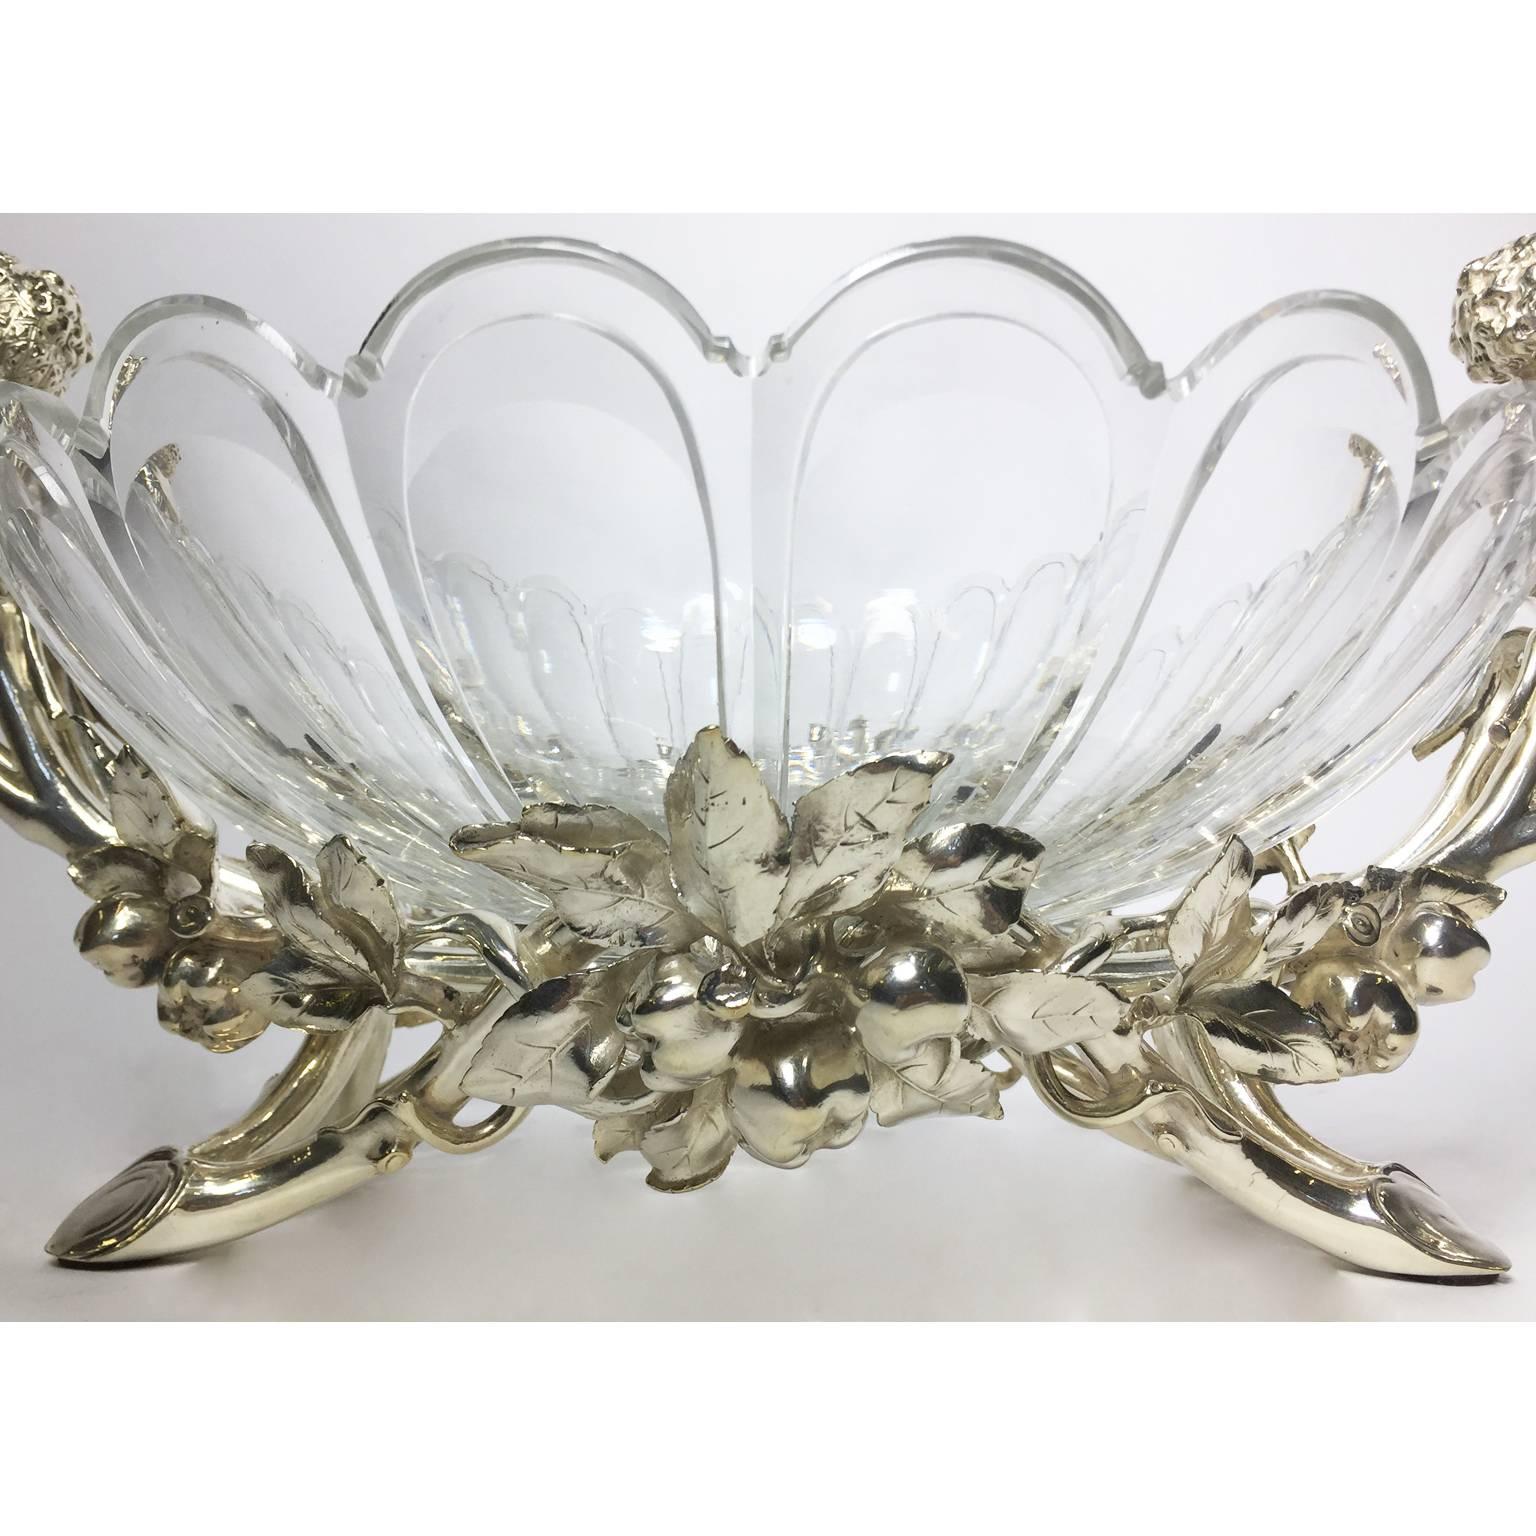 Carved French 19th-20th Century Louis XV Style Silvered Christofle & Cie Centerpiece For Sale